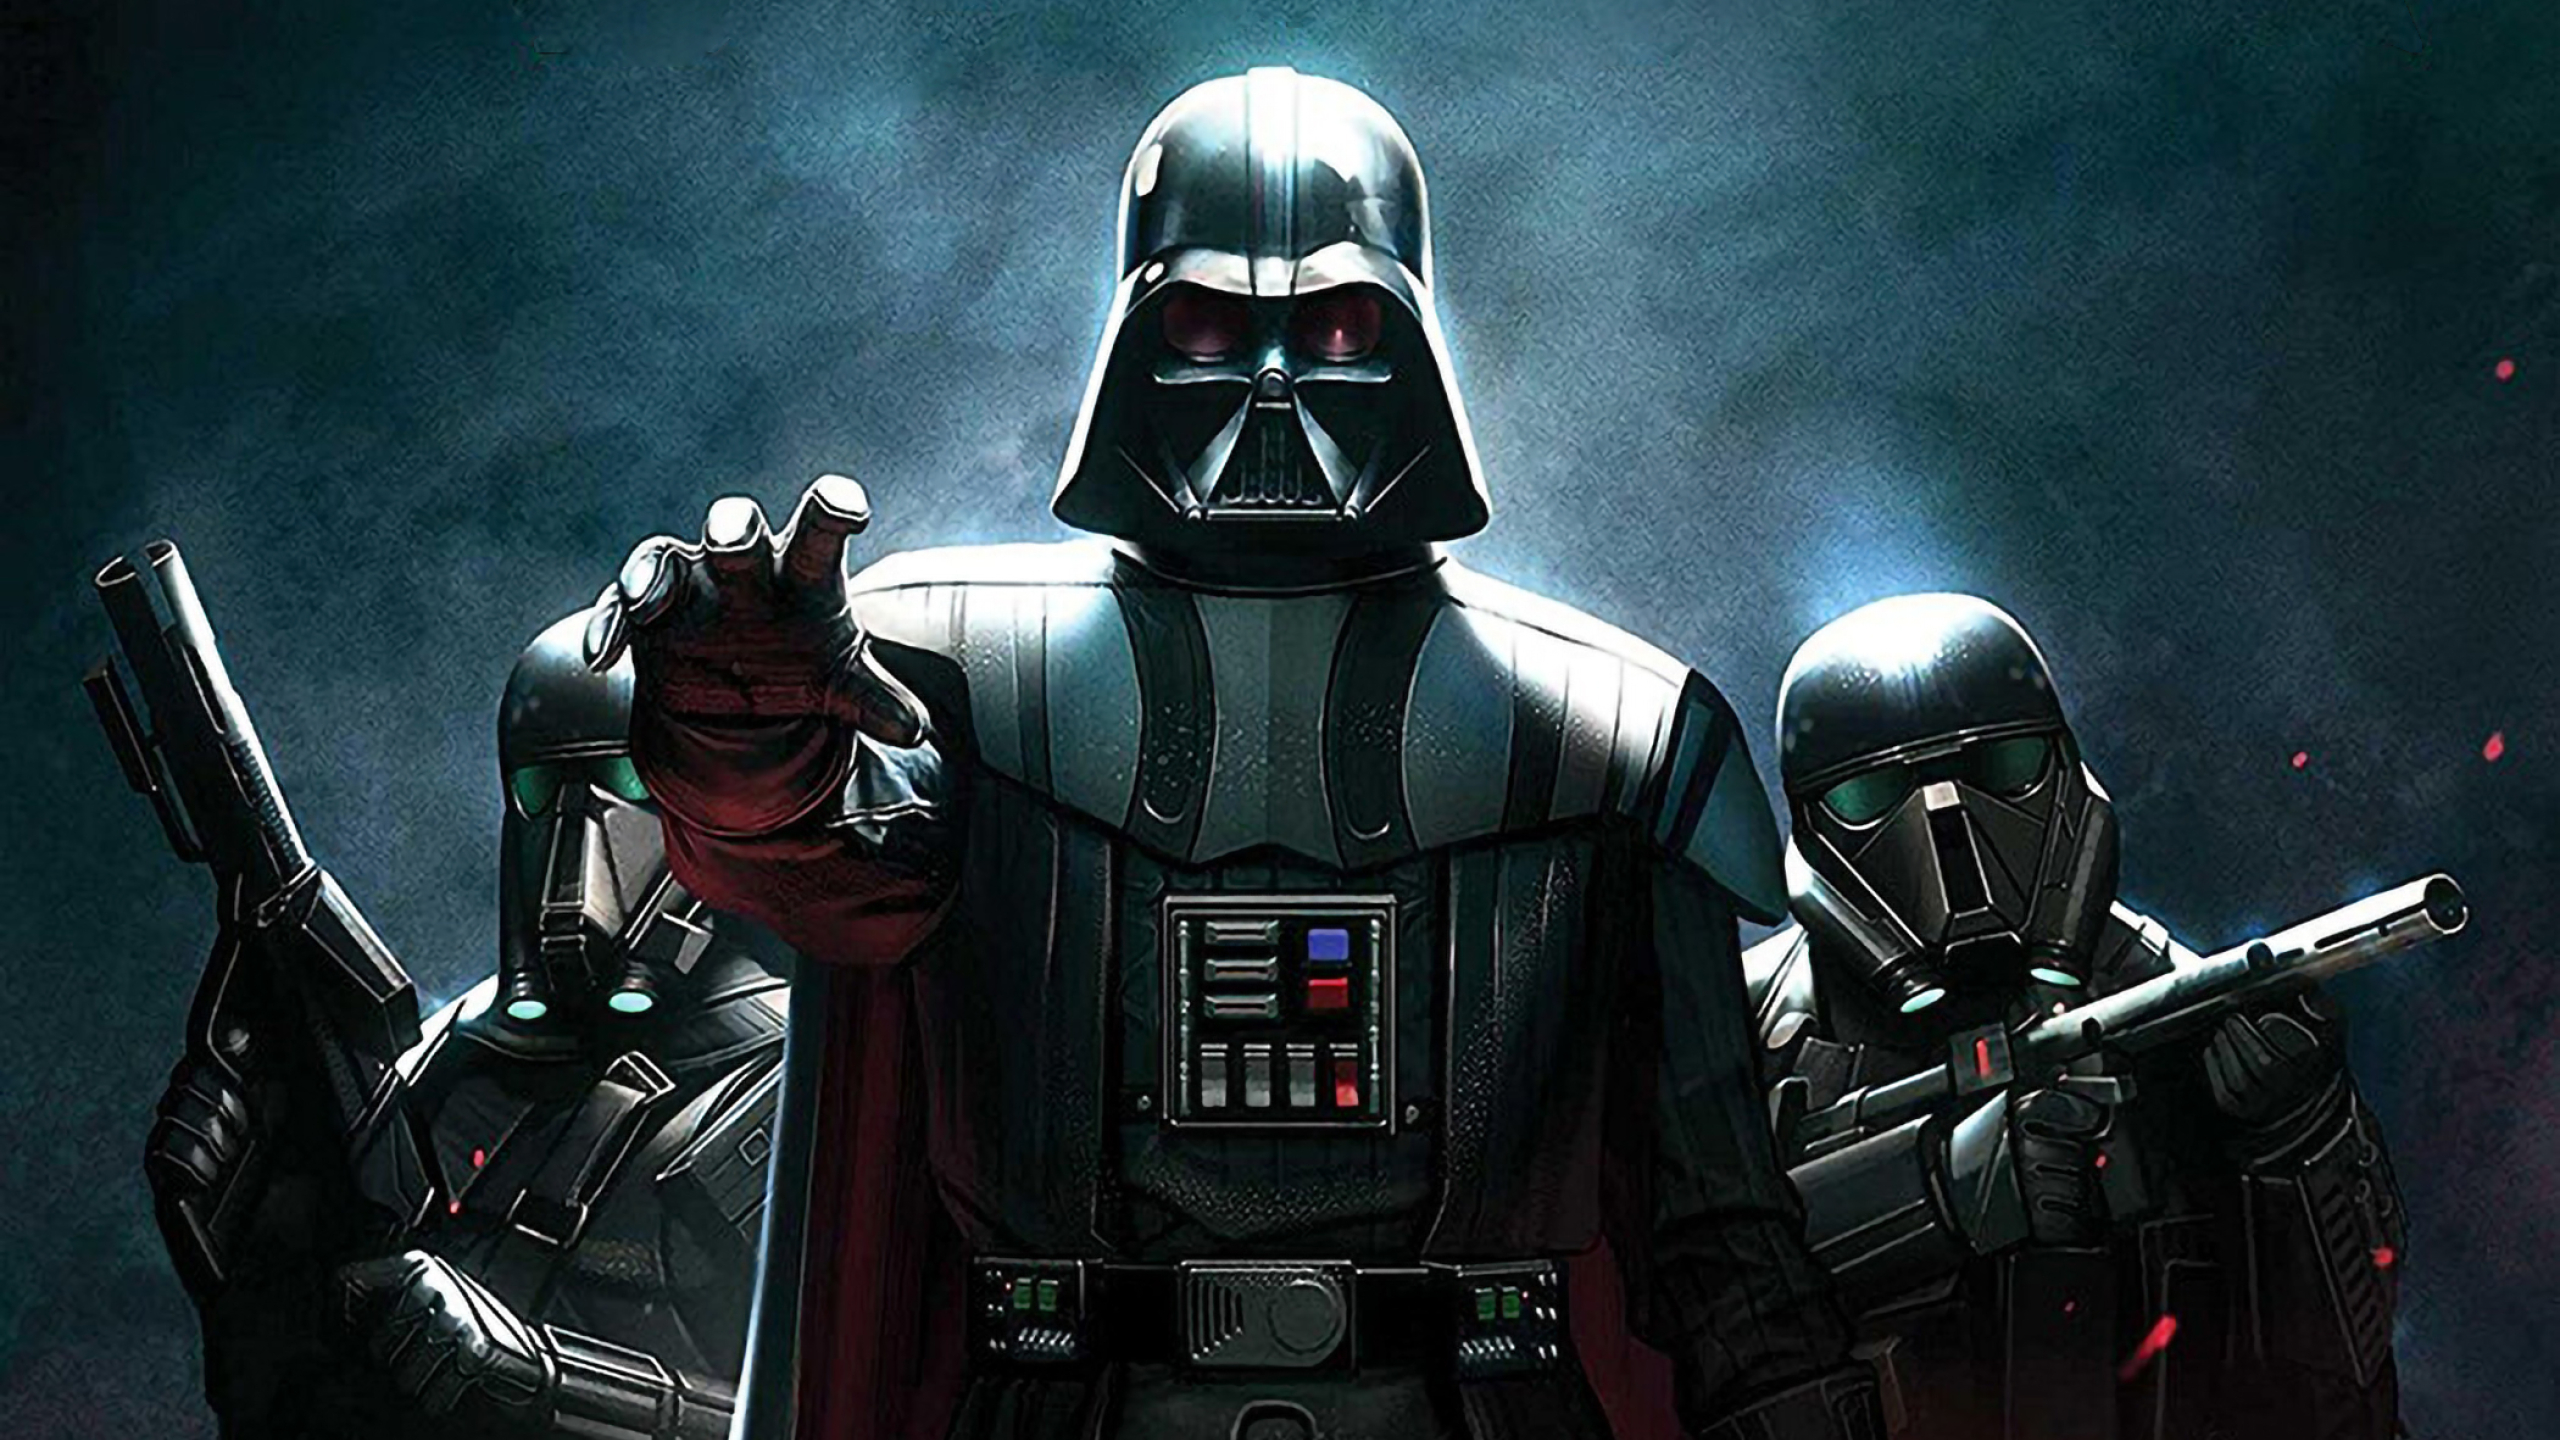 Featured image of post Darth Vader Star Wars Wallpaper 2560X1440 Free darth vader wallpapers and darth vader backgrounds for your computer desktop